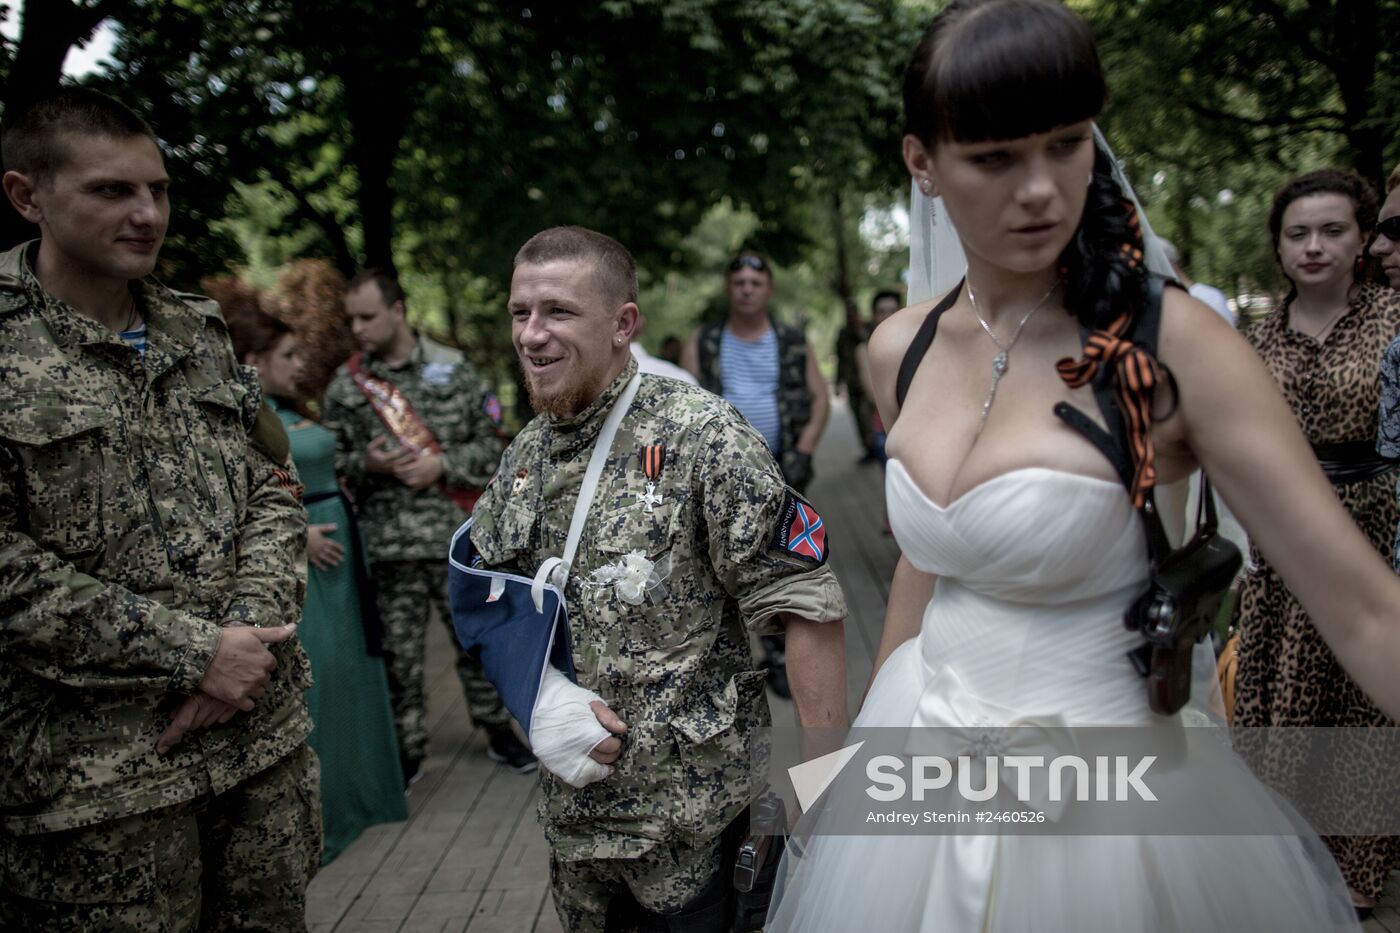 First marriage registered in Novorossiya (New Russia)